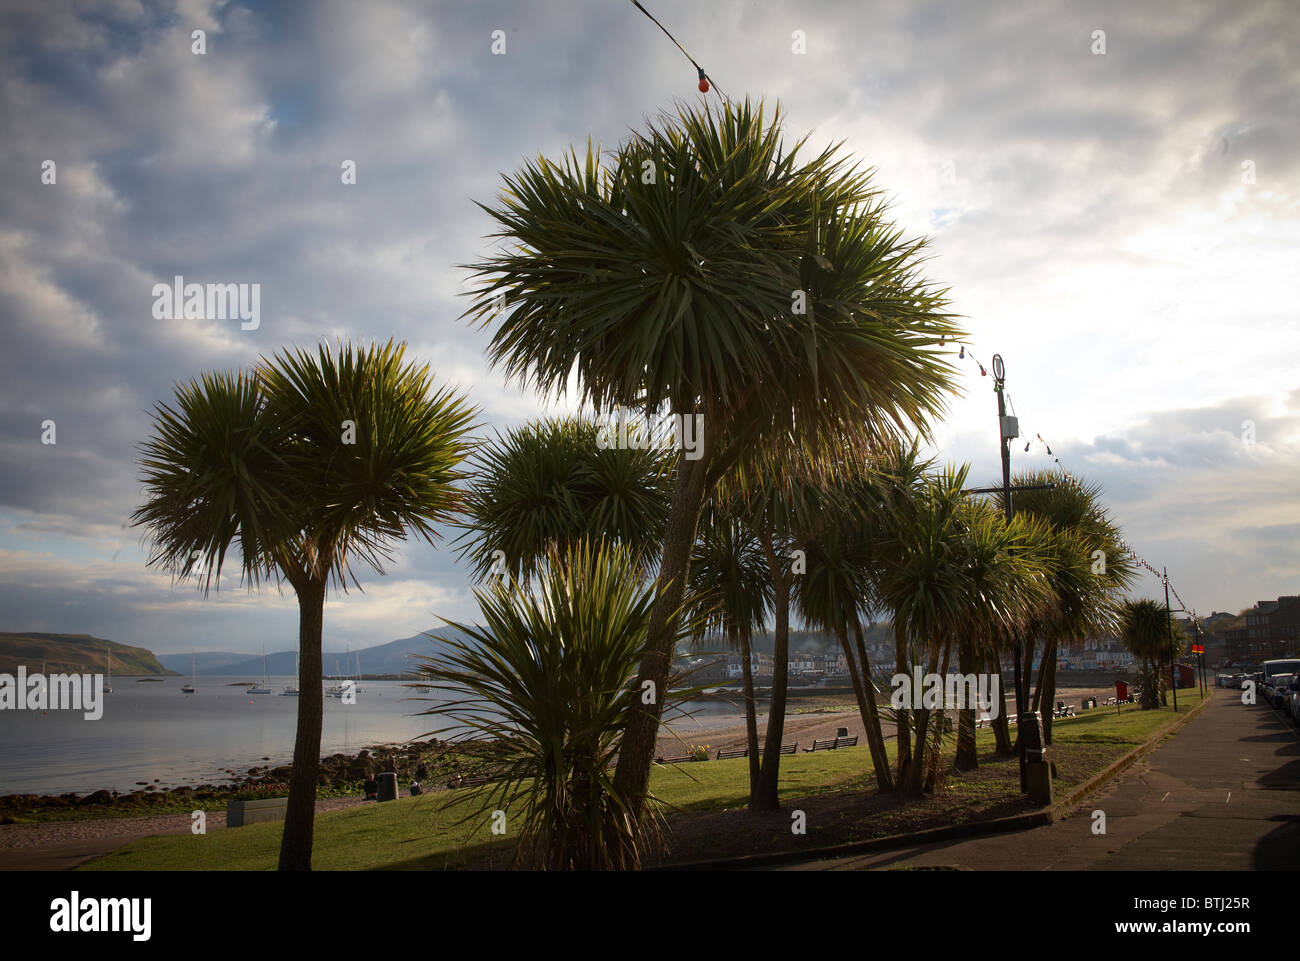 Views of palm trees on the Seafront at Millport on the Isle of Cumbrae, off the coast of Largs Ayrshire, Scoltland Stock Photo